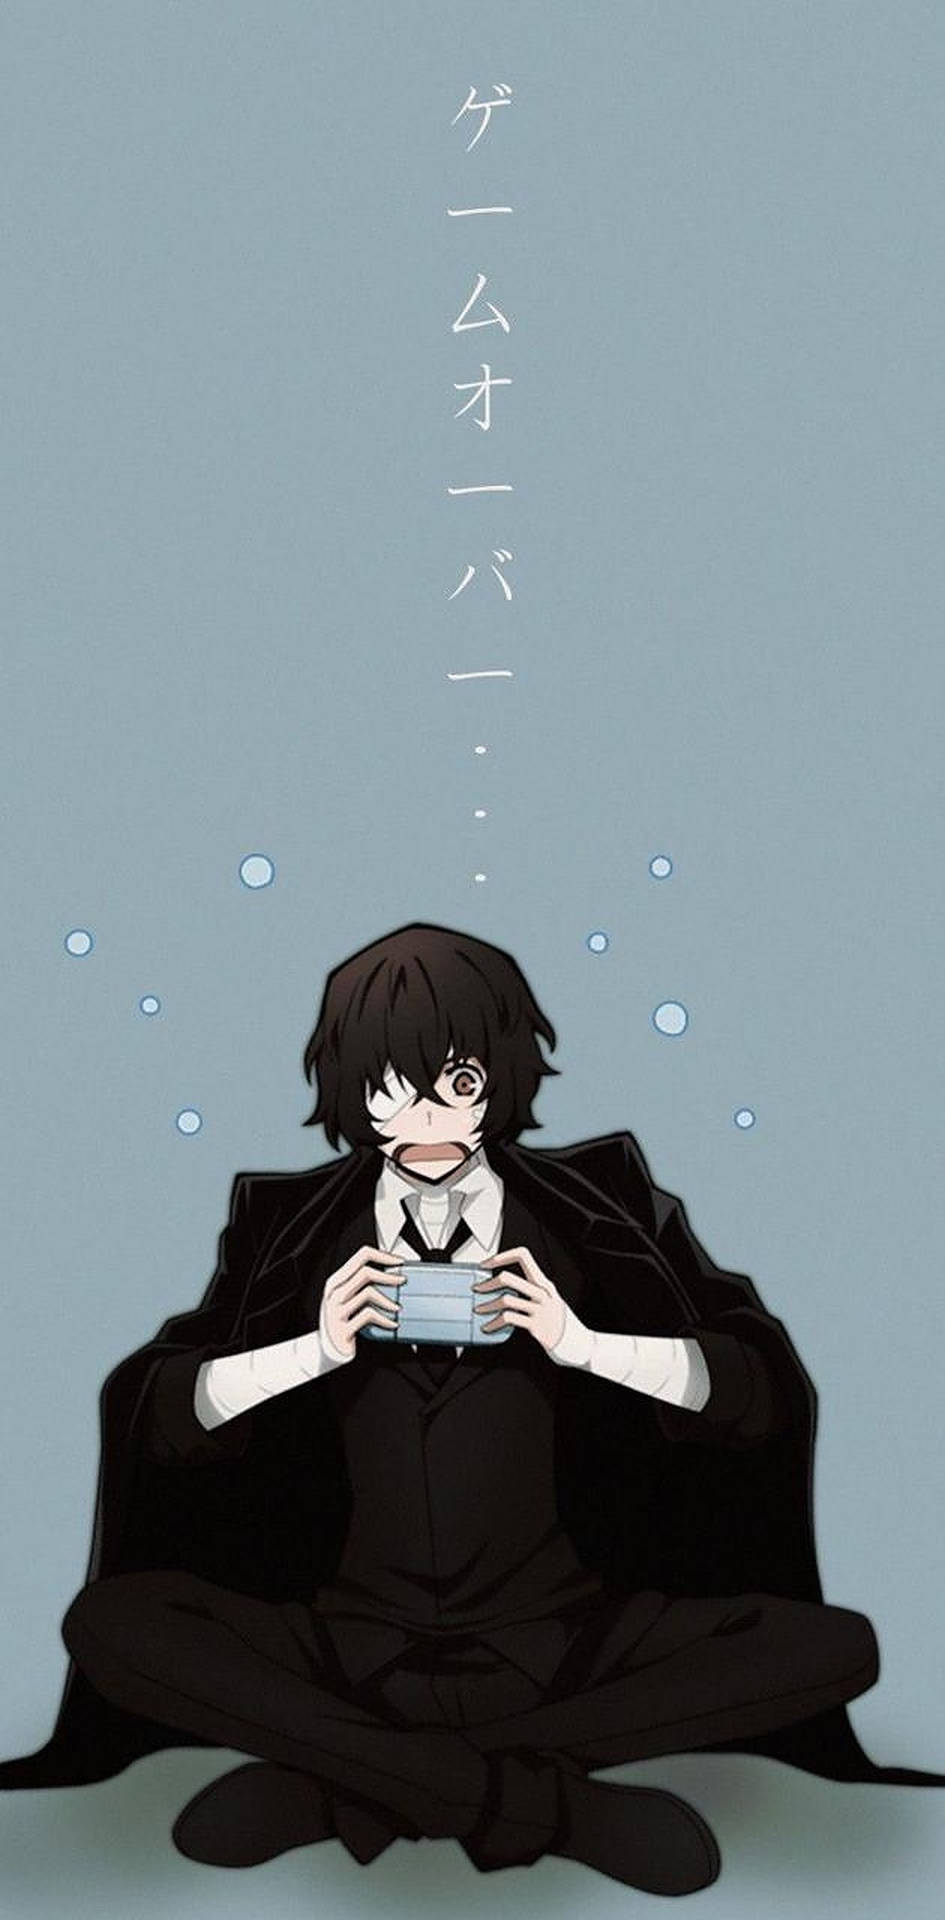 Dazai Engrossed In A Virtual Game Background